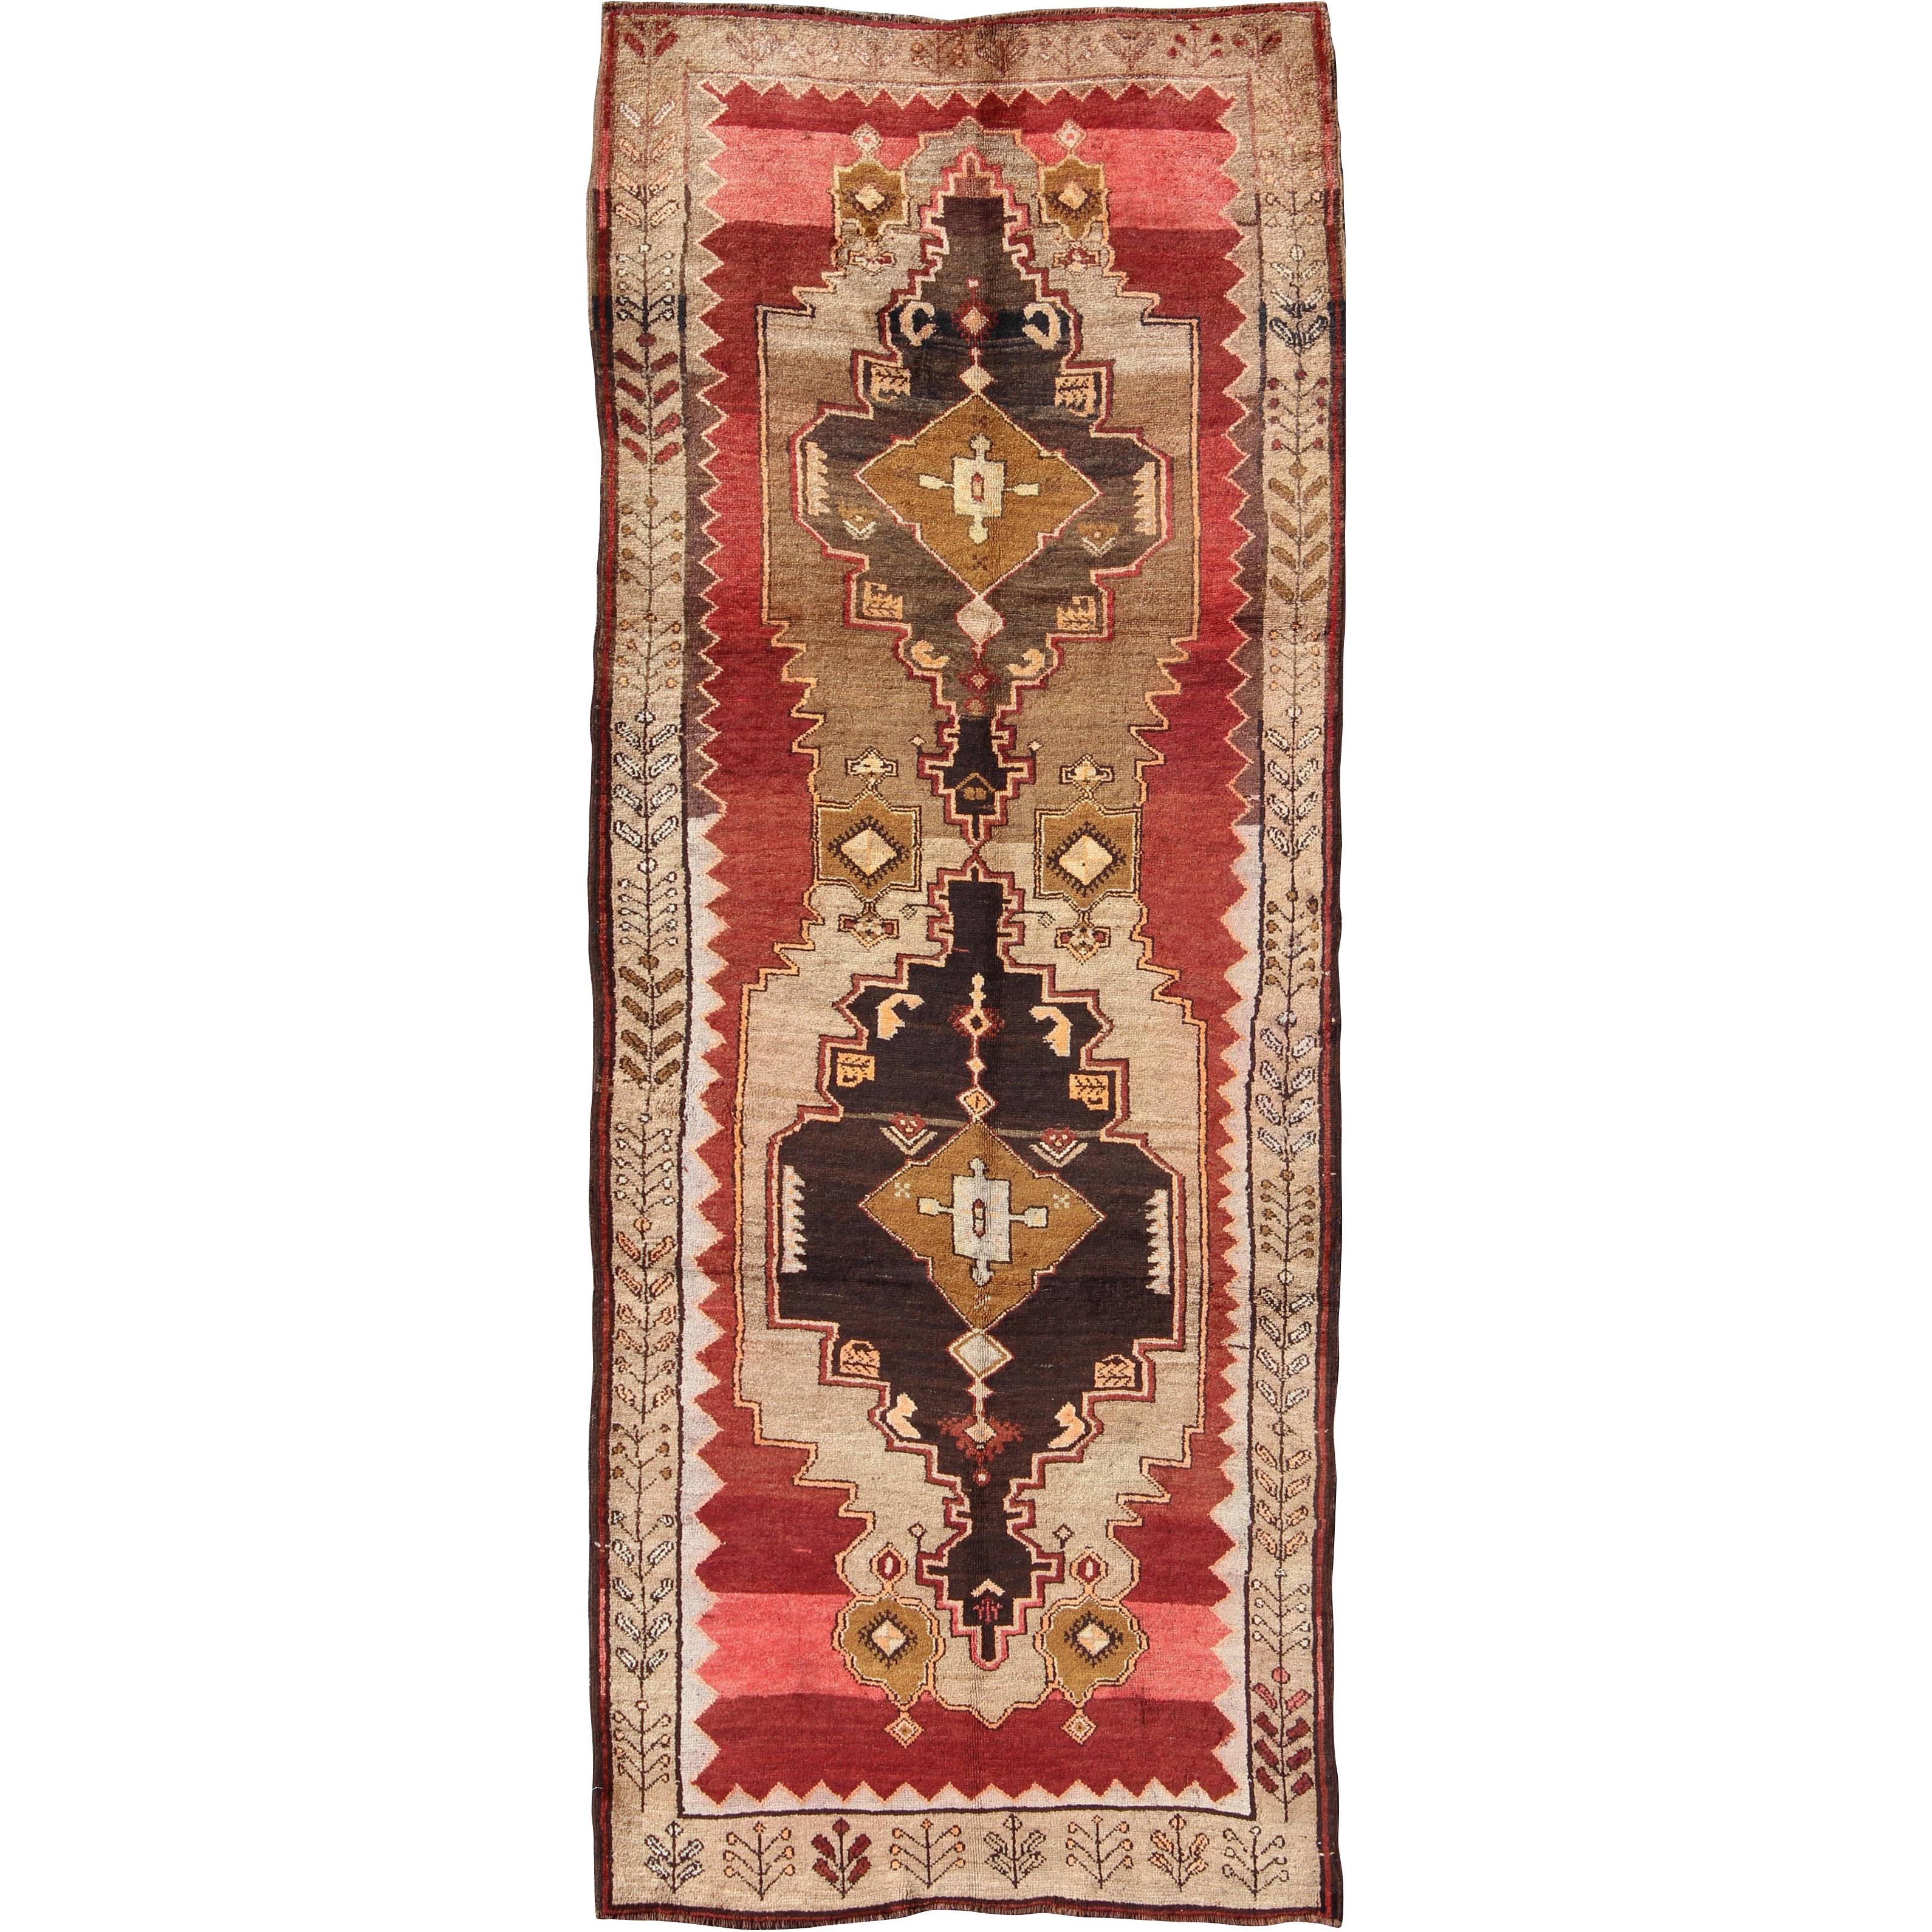 Tribal Turkish Rug from Turkey with Colorful Dual Central Medallion Design For Sale